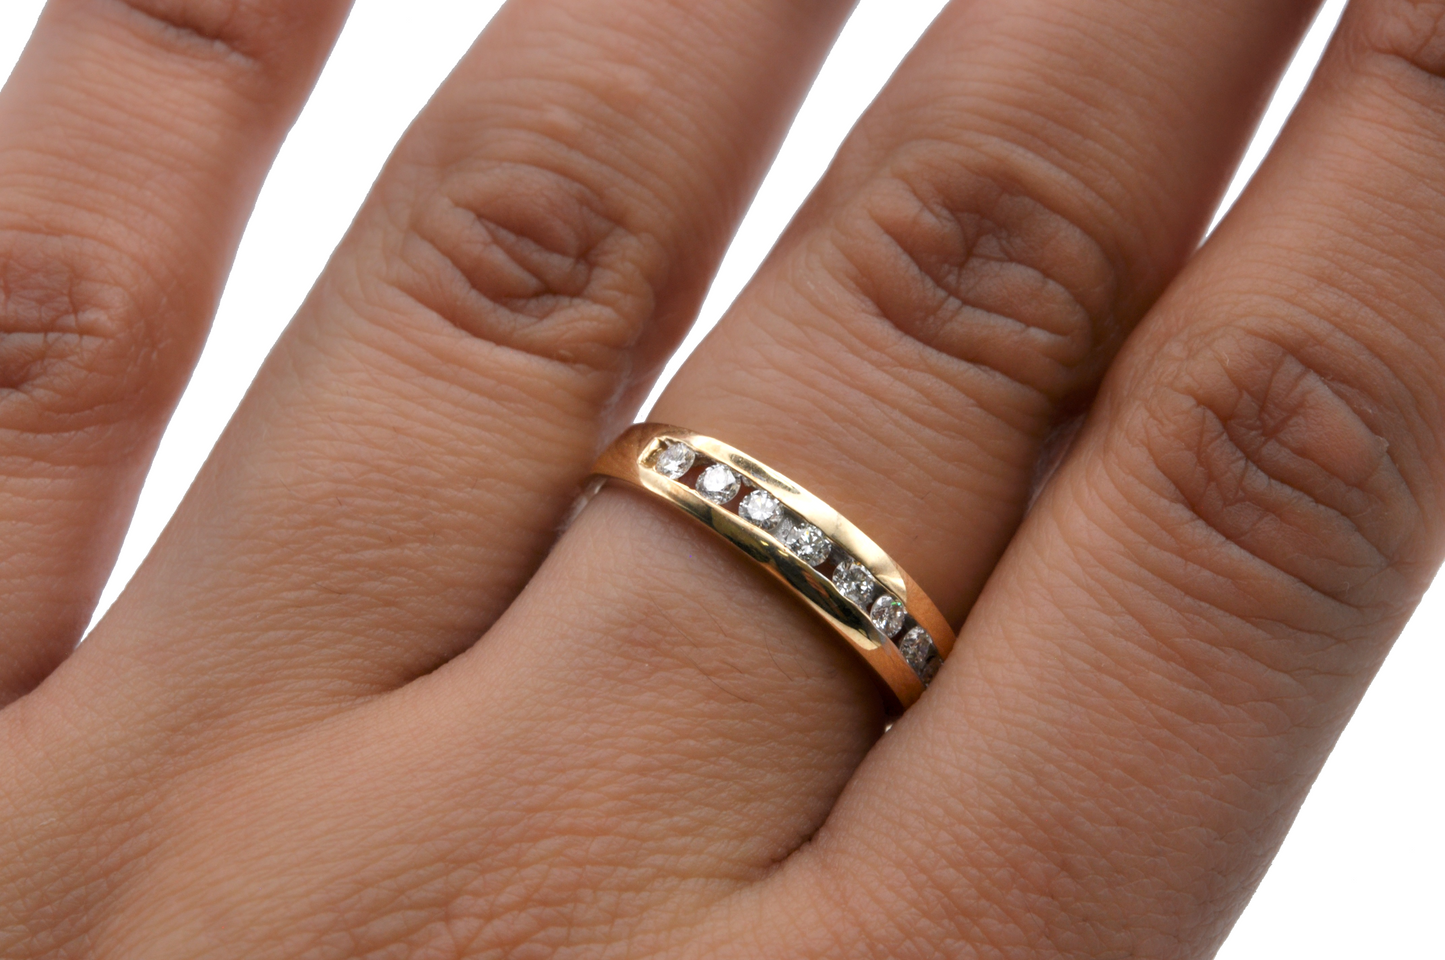 Stackable Yellow Gold Ring with a Row of Diamonds